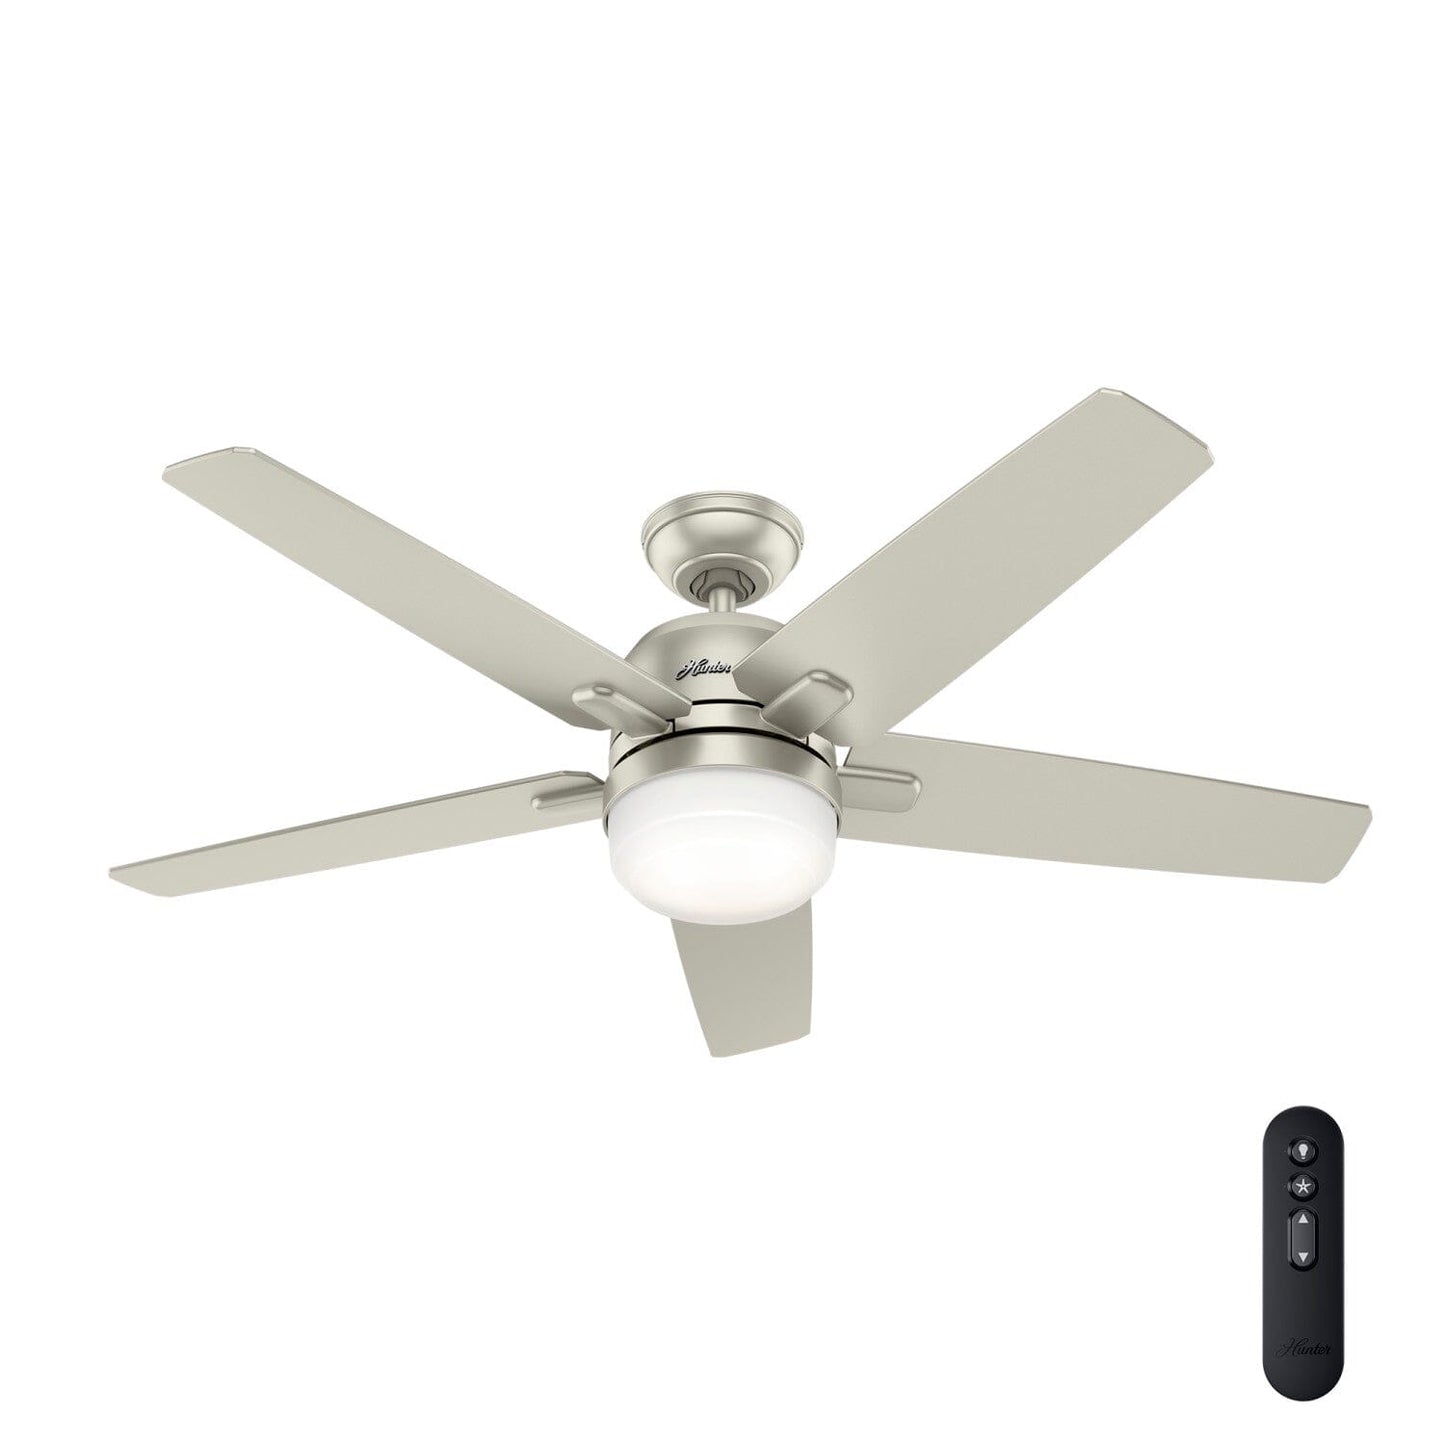 Cavera SimpleConnect Wi-Fi with LED Light 52 Inch-Smart Ceiling Fans Hunter Matte Nickel - Matte Nickel 